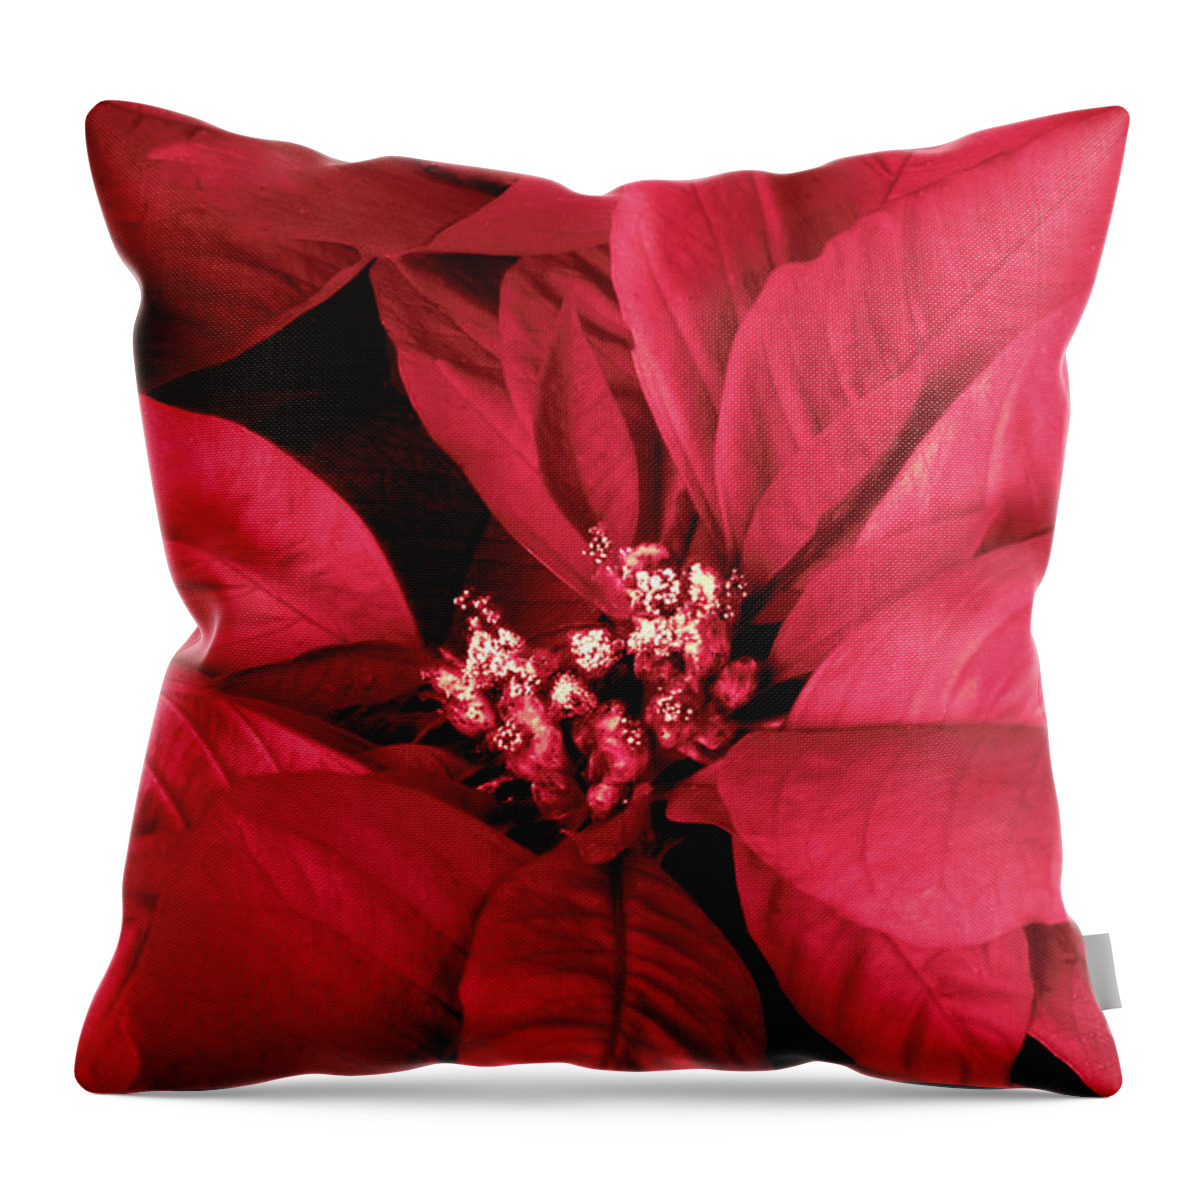 Poinsettia Throw Pillow featuring the photograph The Beauty of a Poinsettia Flower by Sherry Hallemeier